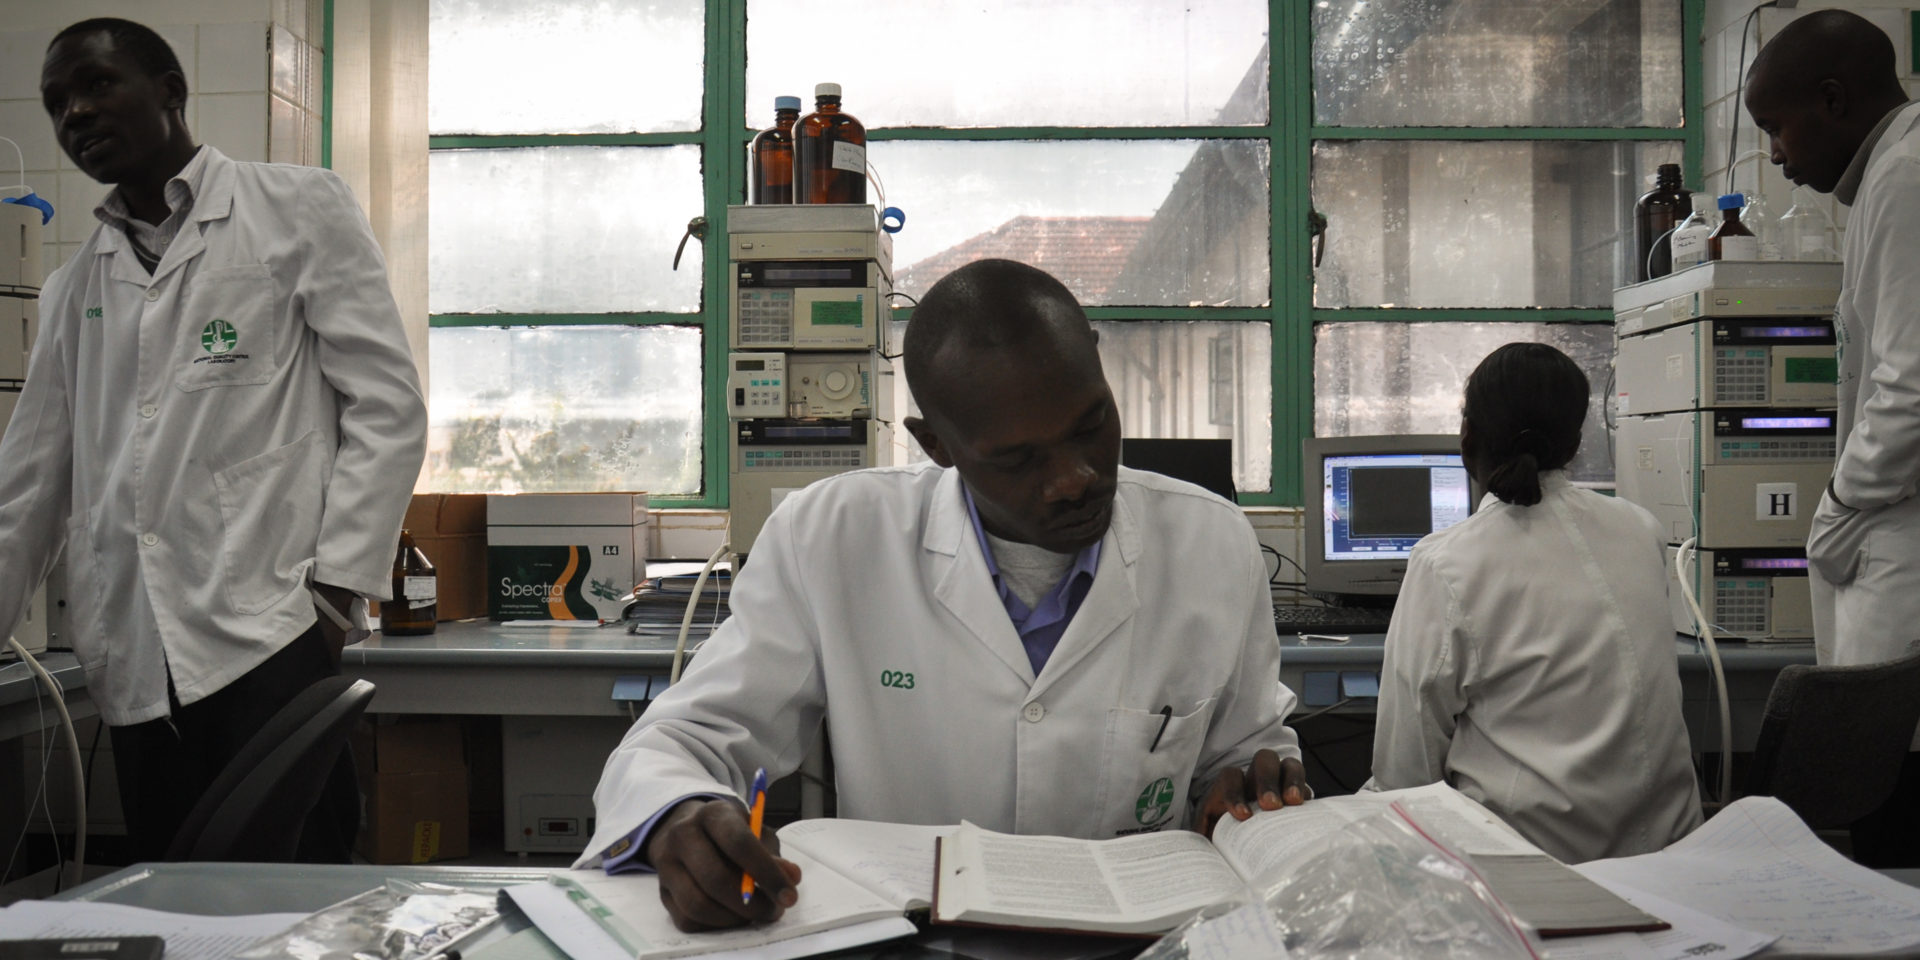 Several people in lab coats working amongst medical equipment. One in the center is reading through a large book and taking notes.